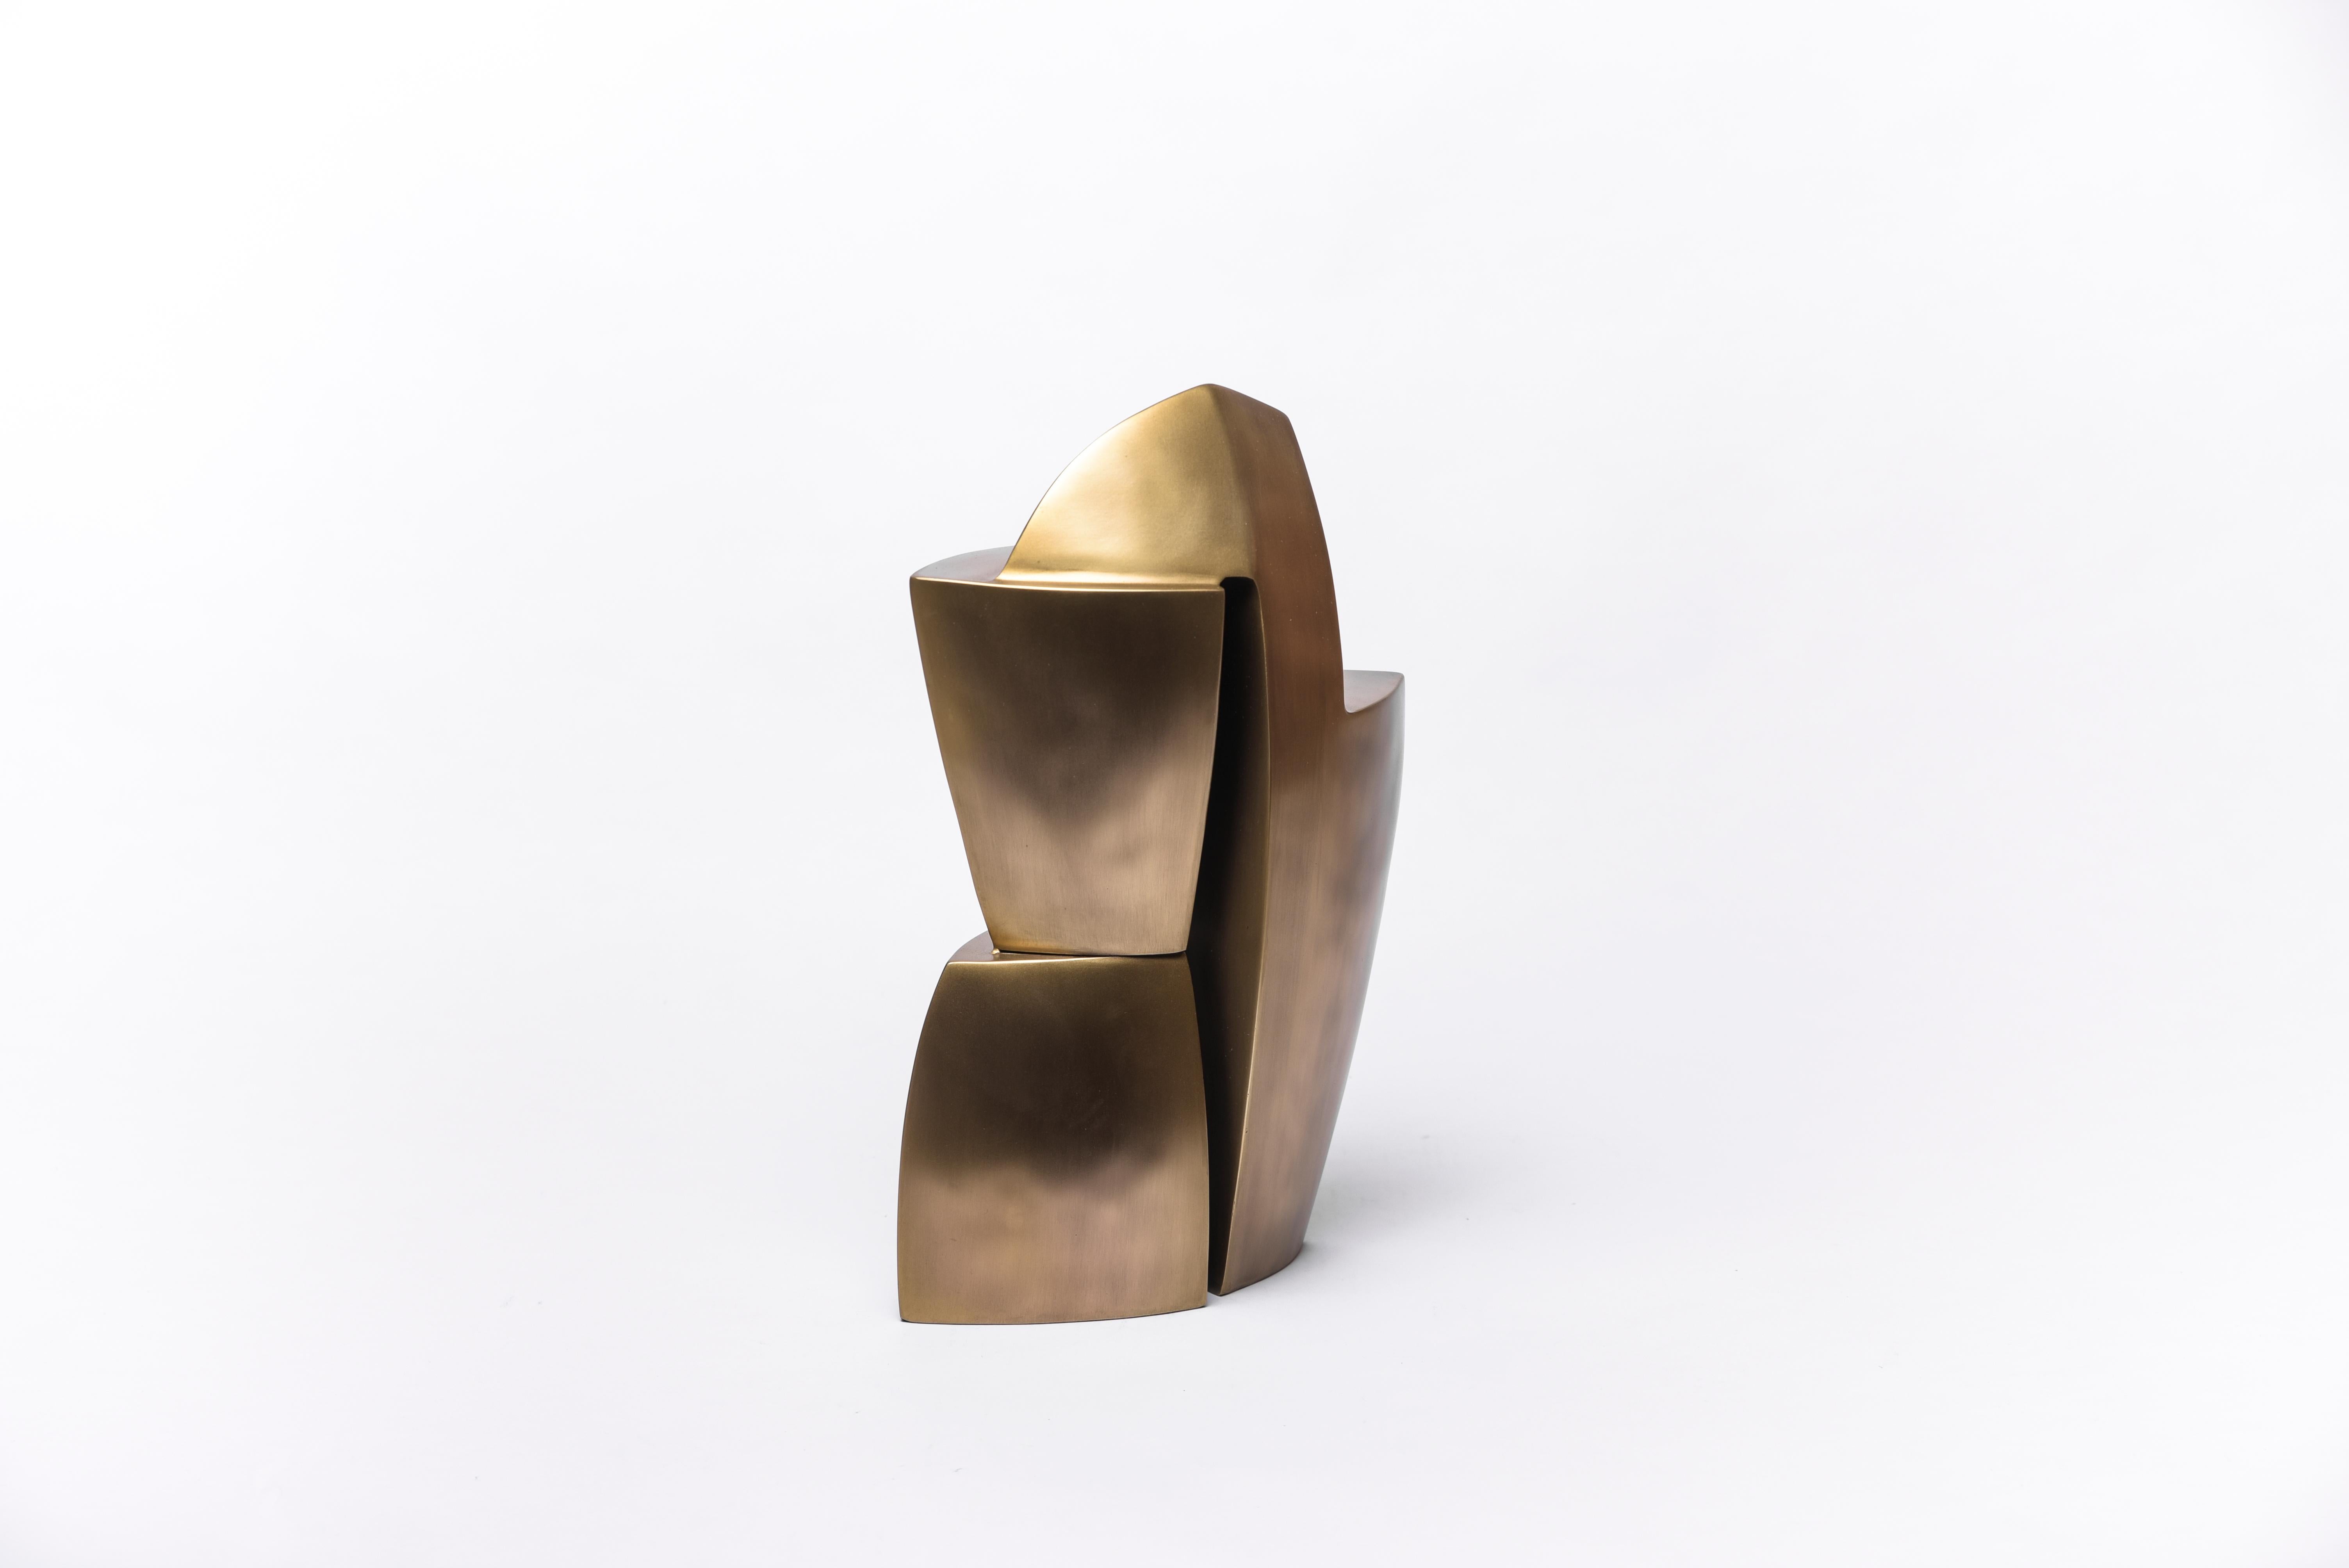 Patrick Coard Paris launches a unique and beautiful sculptural object collection. The Deconstructed Tower is geometric and sleek with it's delicate but defined details. The piece is entirely handcrafted in bronze-patina brass. 

The dimensions of